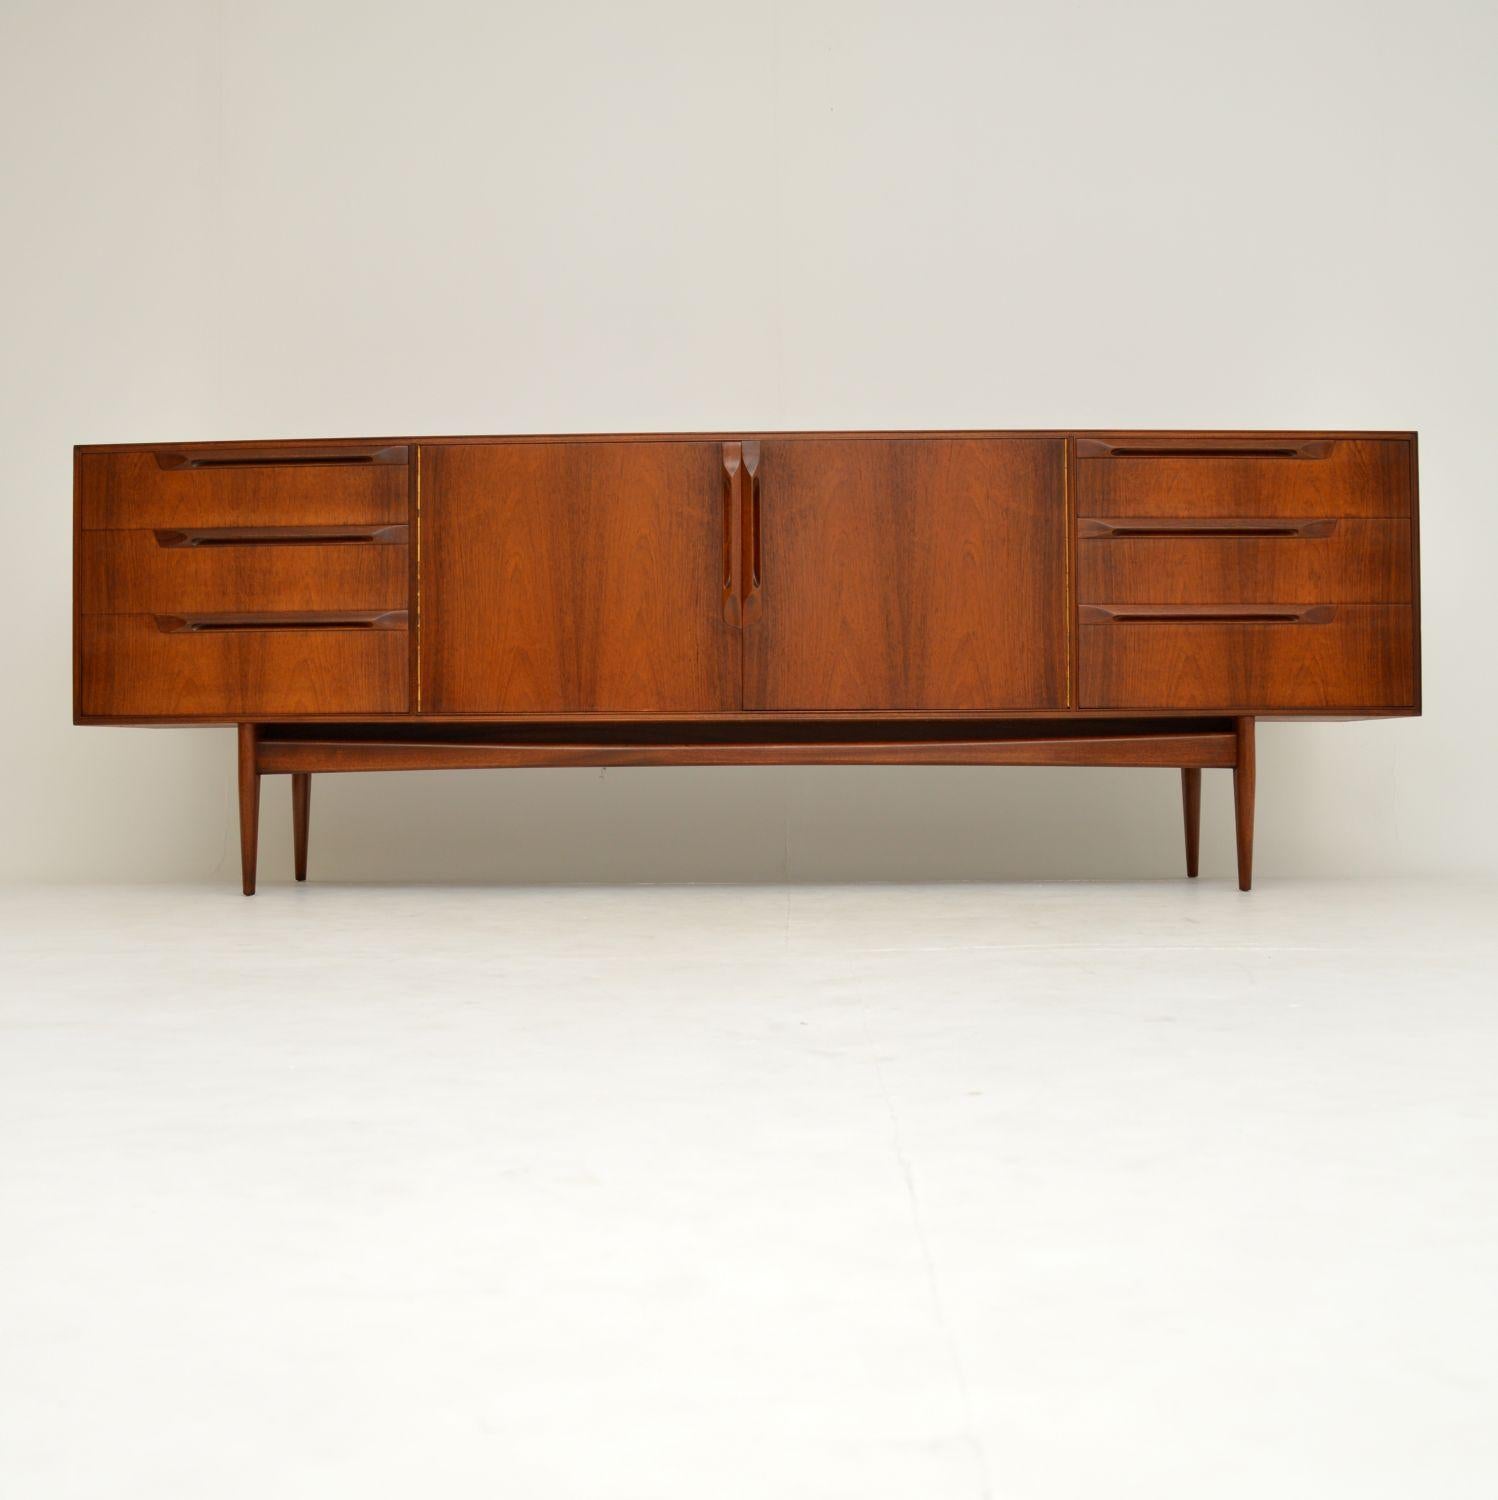 A stunning and very rare vintage sideboard. This was made by McIntosh, it dates from the 1960s. It is huge, and yet so sleek and stylish. The quality is incredible, and this is made from beautifully grained wood. The sculptural handles are a lovely